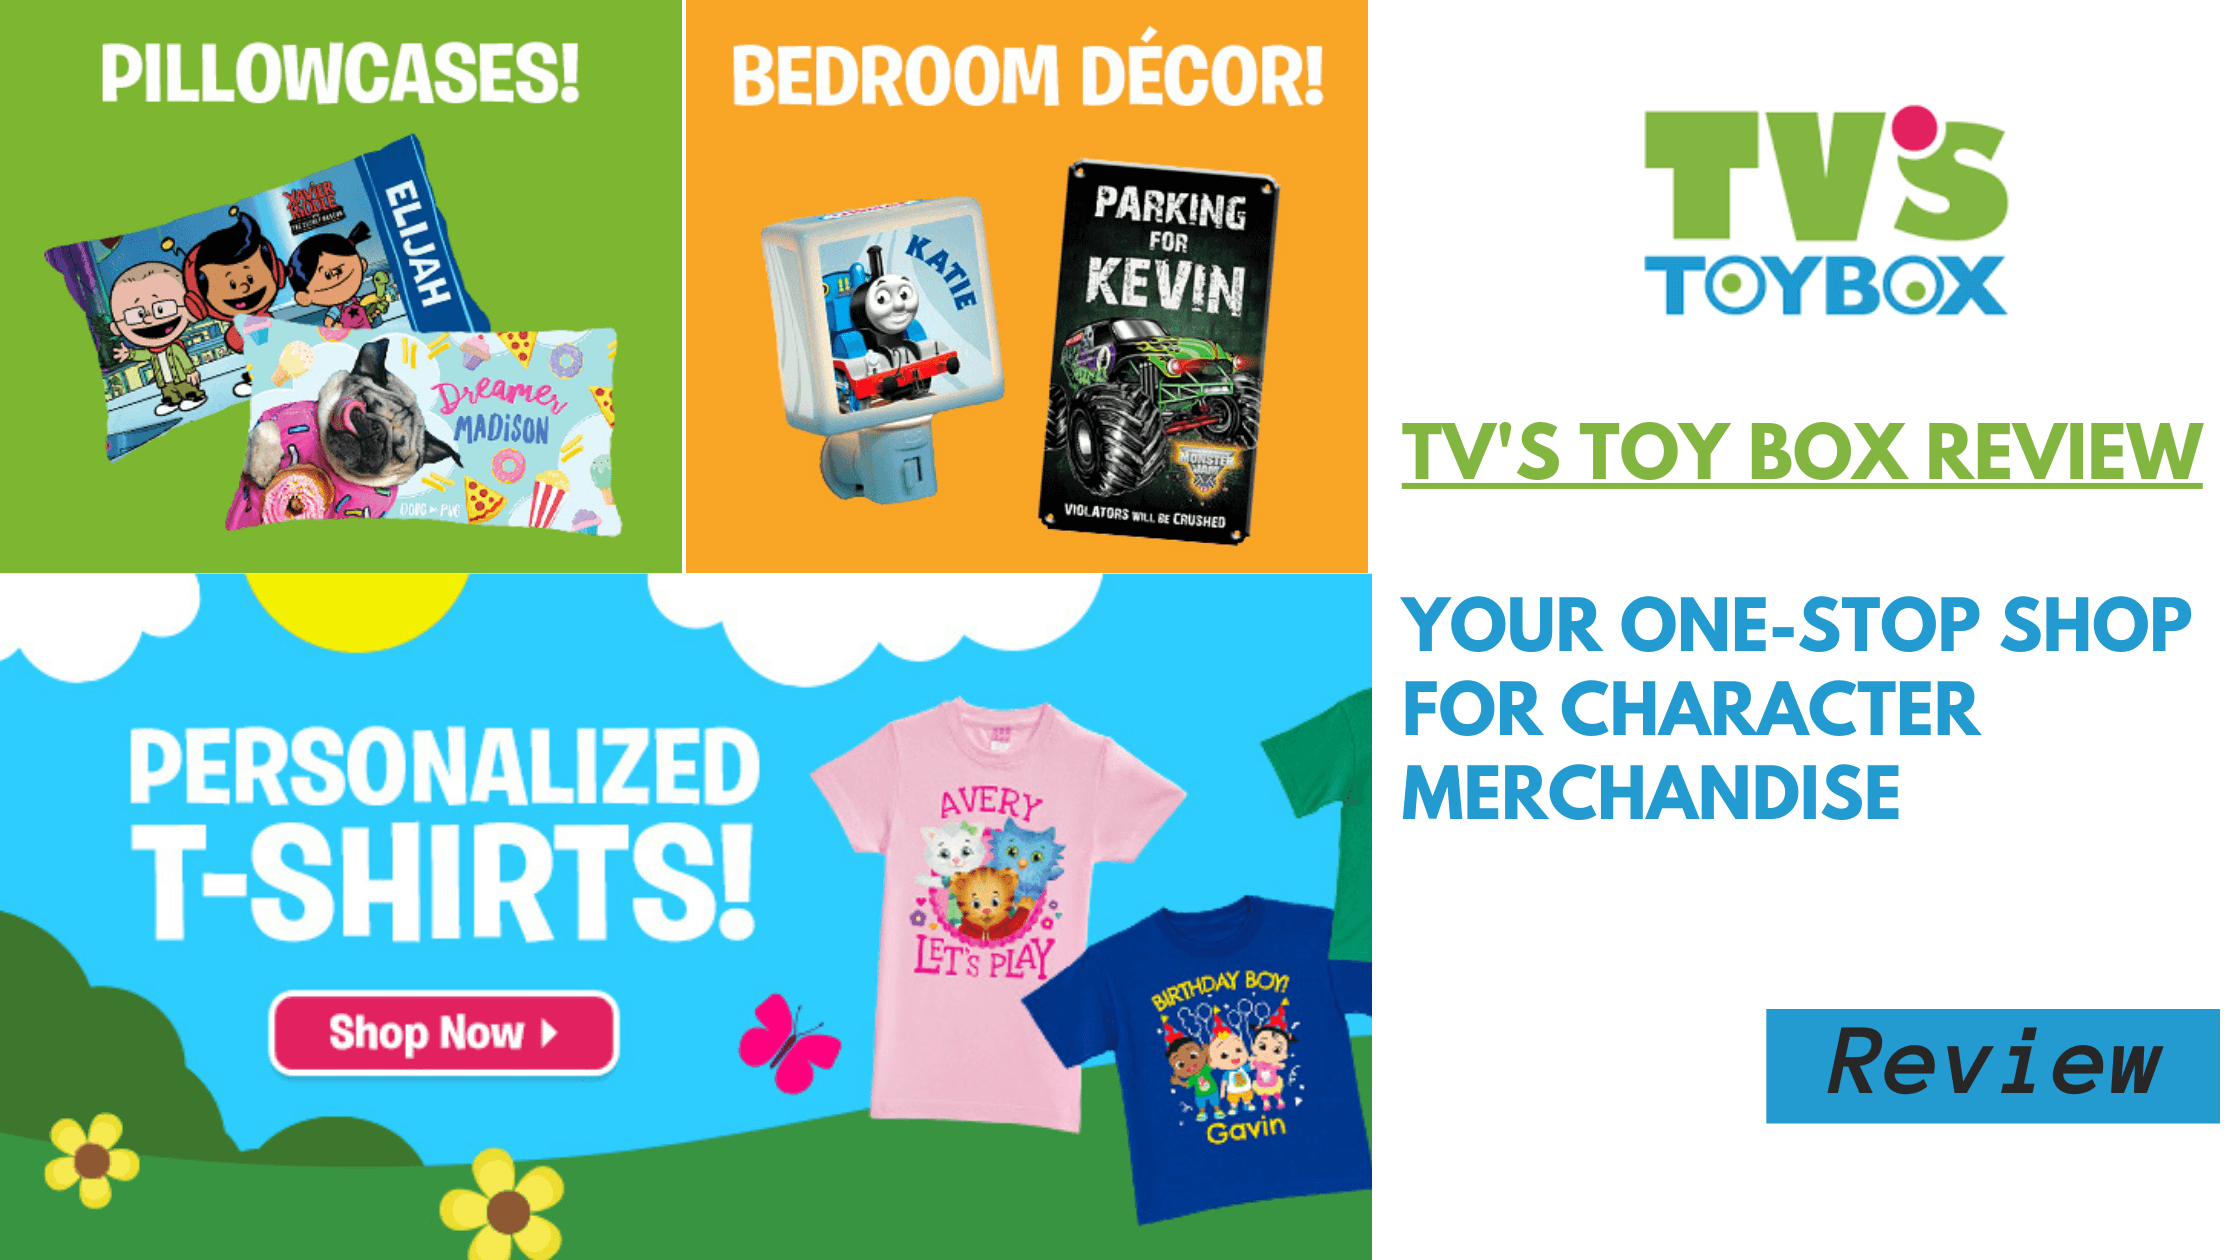 TV’s Toy Box Review: Your One-Stop Shop for Character Merchandise